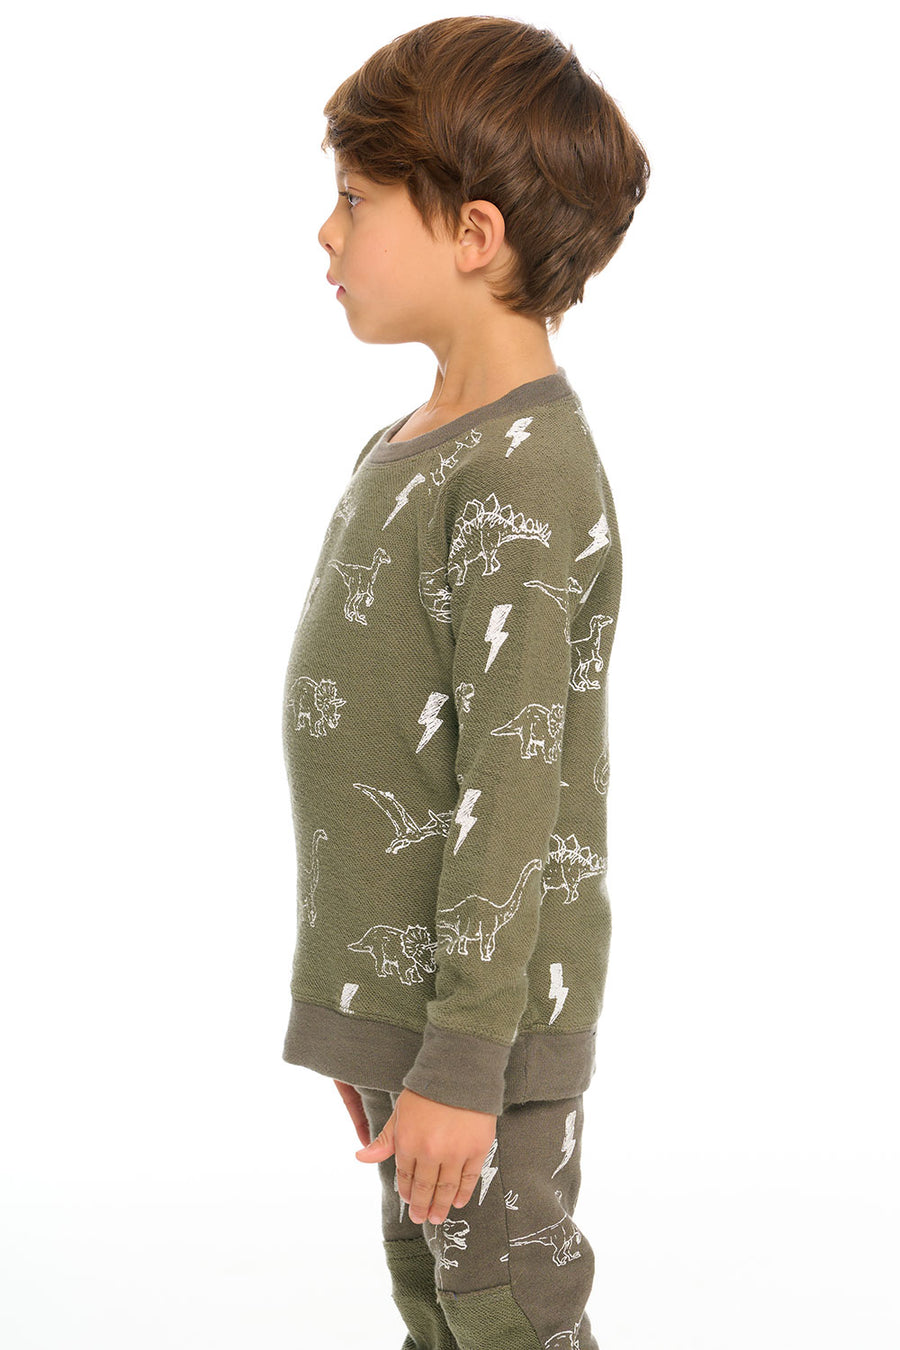 Dino Pullover BOYS chaserbrand